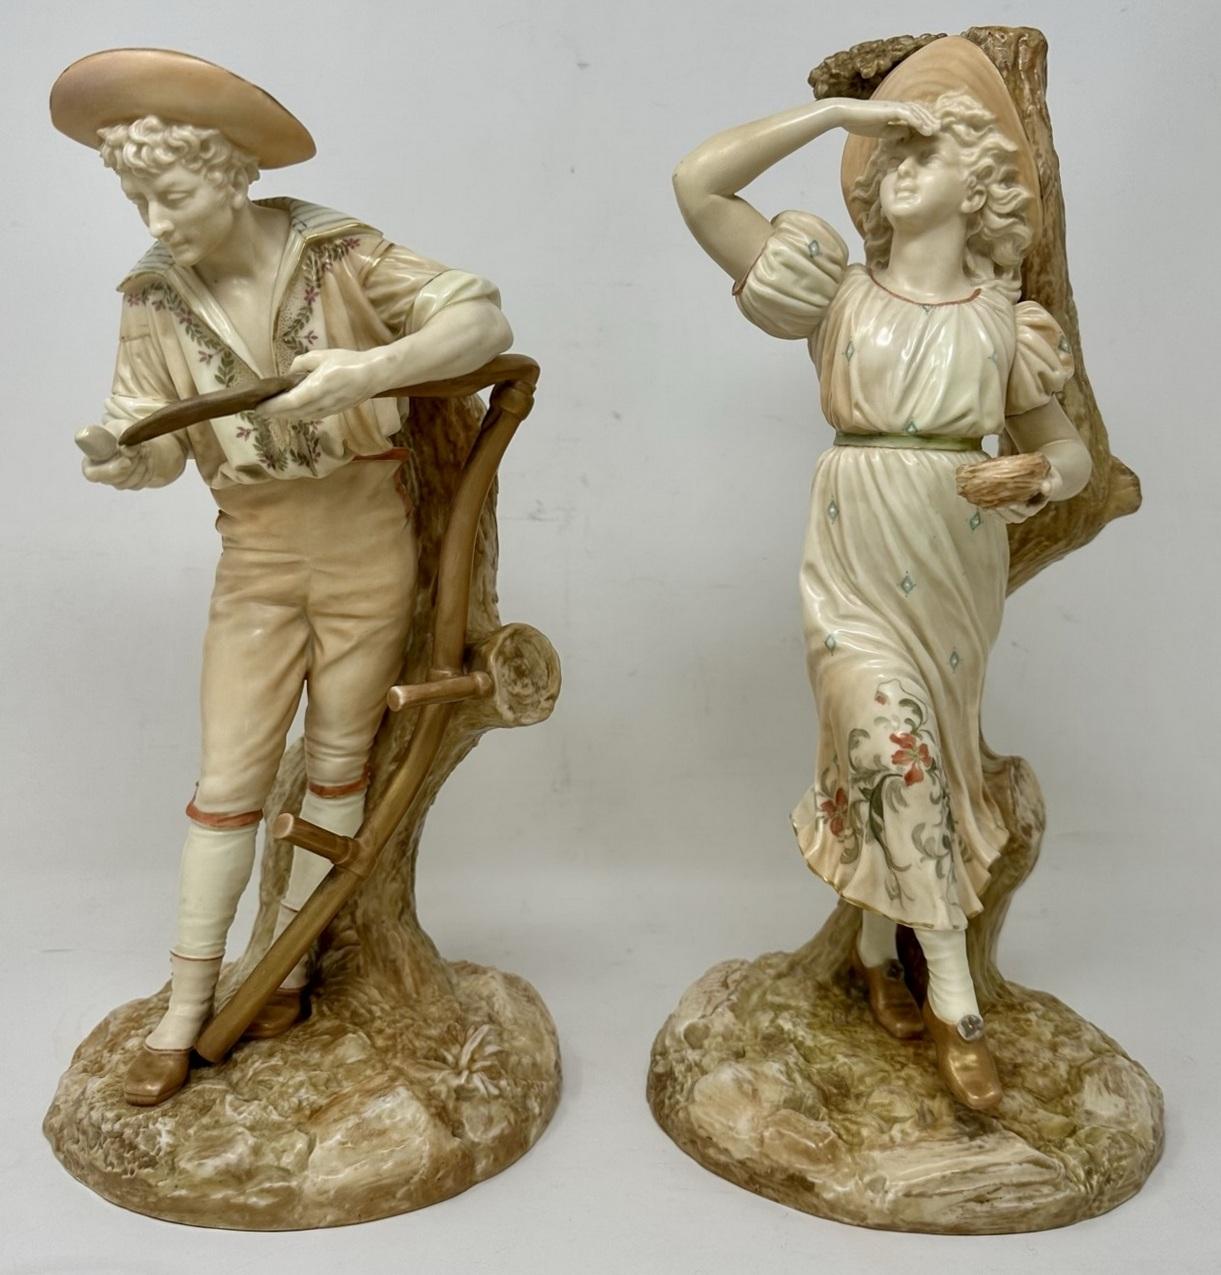 An imposing Pair of English Royal Worcester Hand Painted Standing Figures by James Hadley, decorated in pastel colours with gilt highlights, last quarter of the Nineteenth Century. 

Superbly modelled as a man sharpening his scythe and a woman